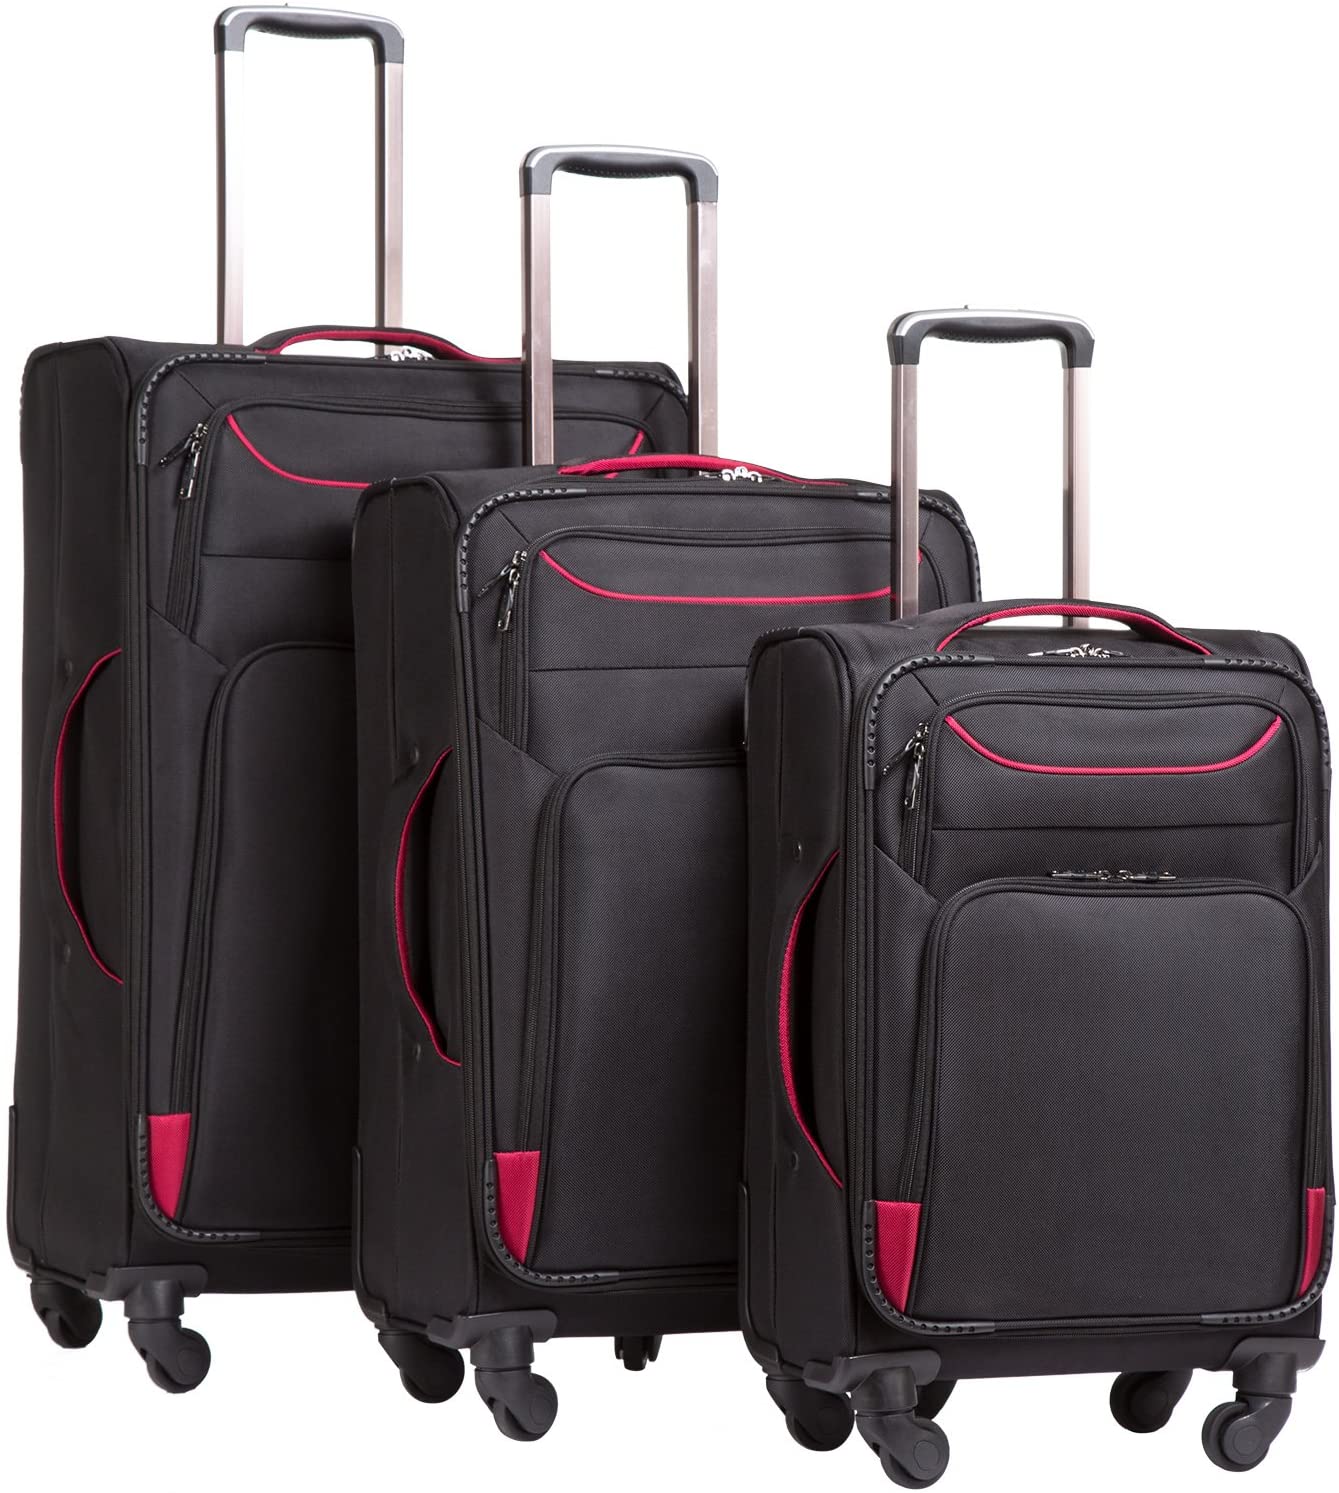 Coolife Oxford Cloth Soft Shell Suitcase, 3-Piece